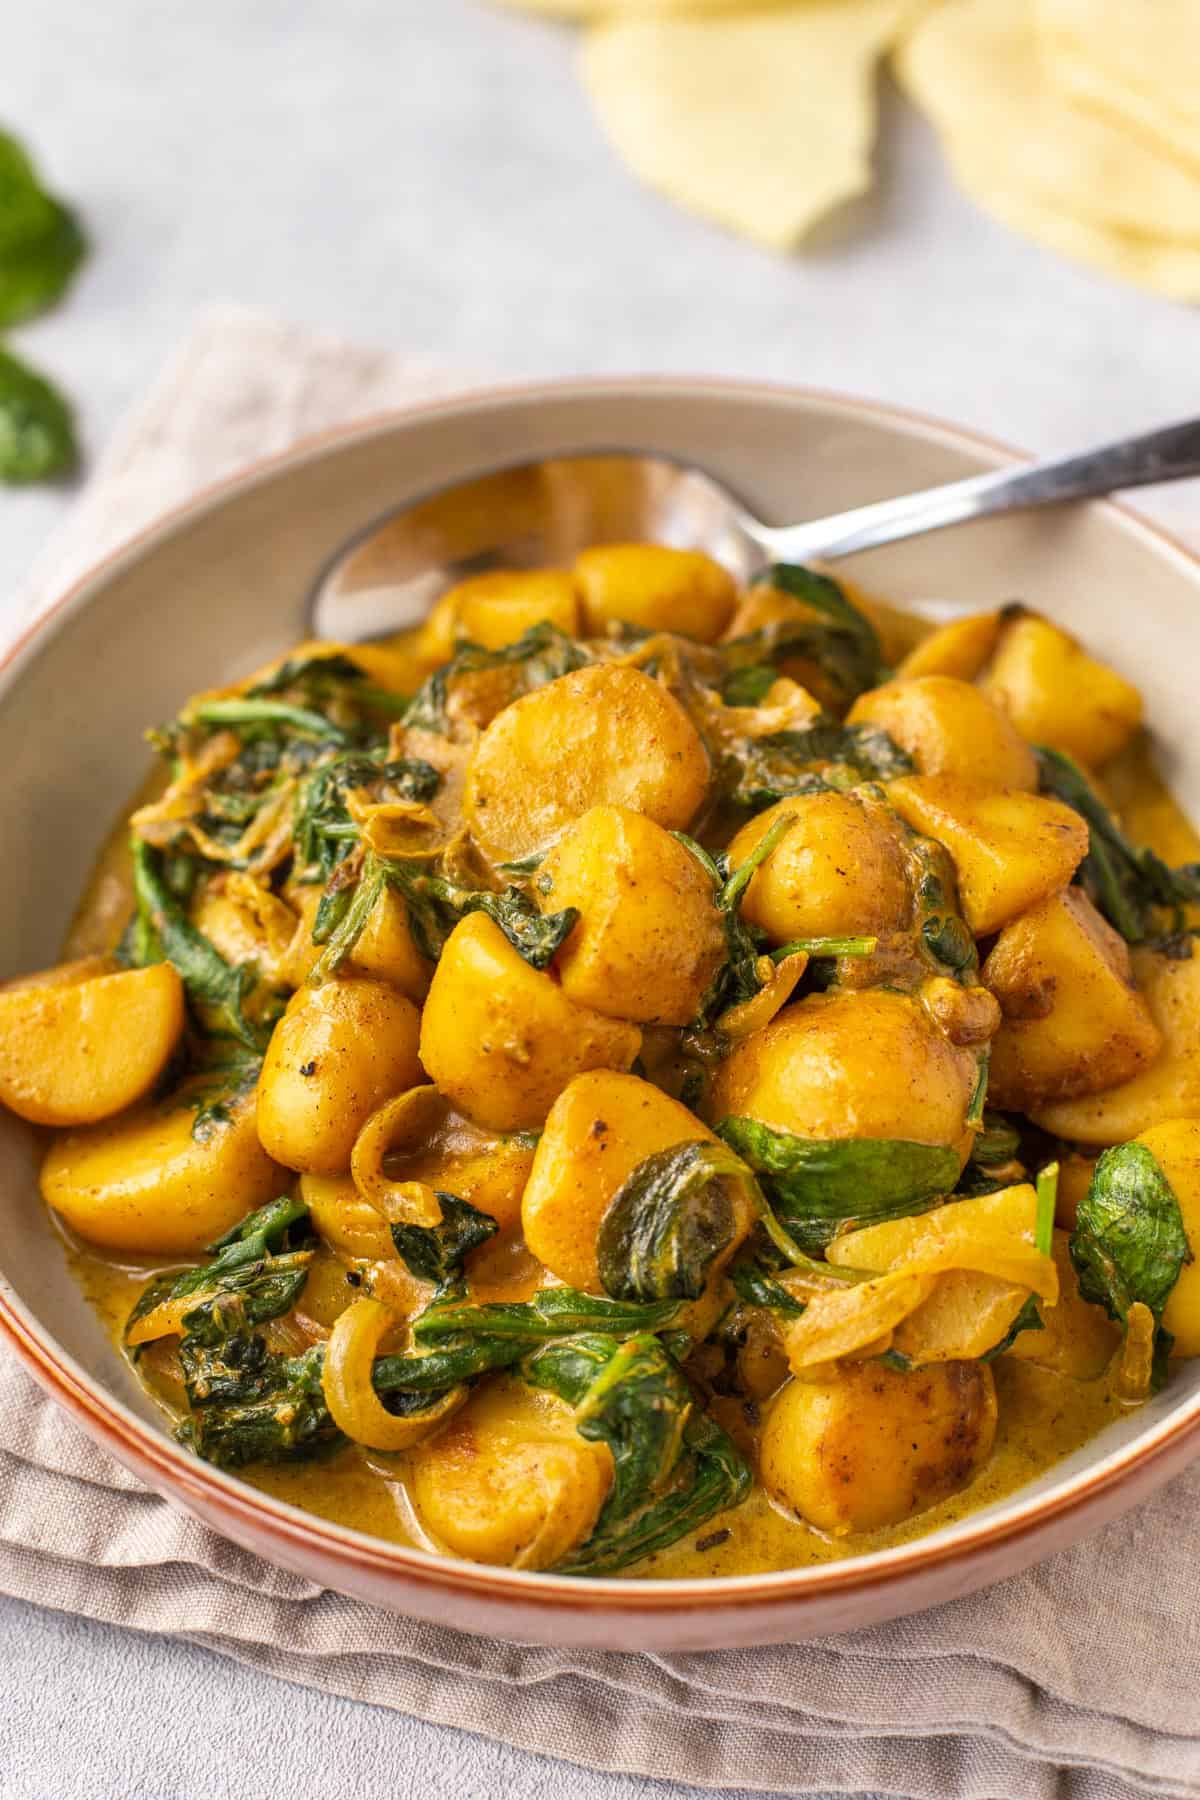 Saag aloo in a bowl with a spoon.